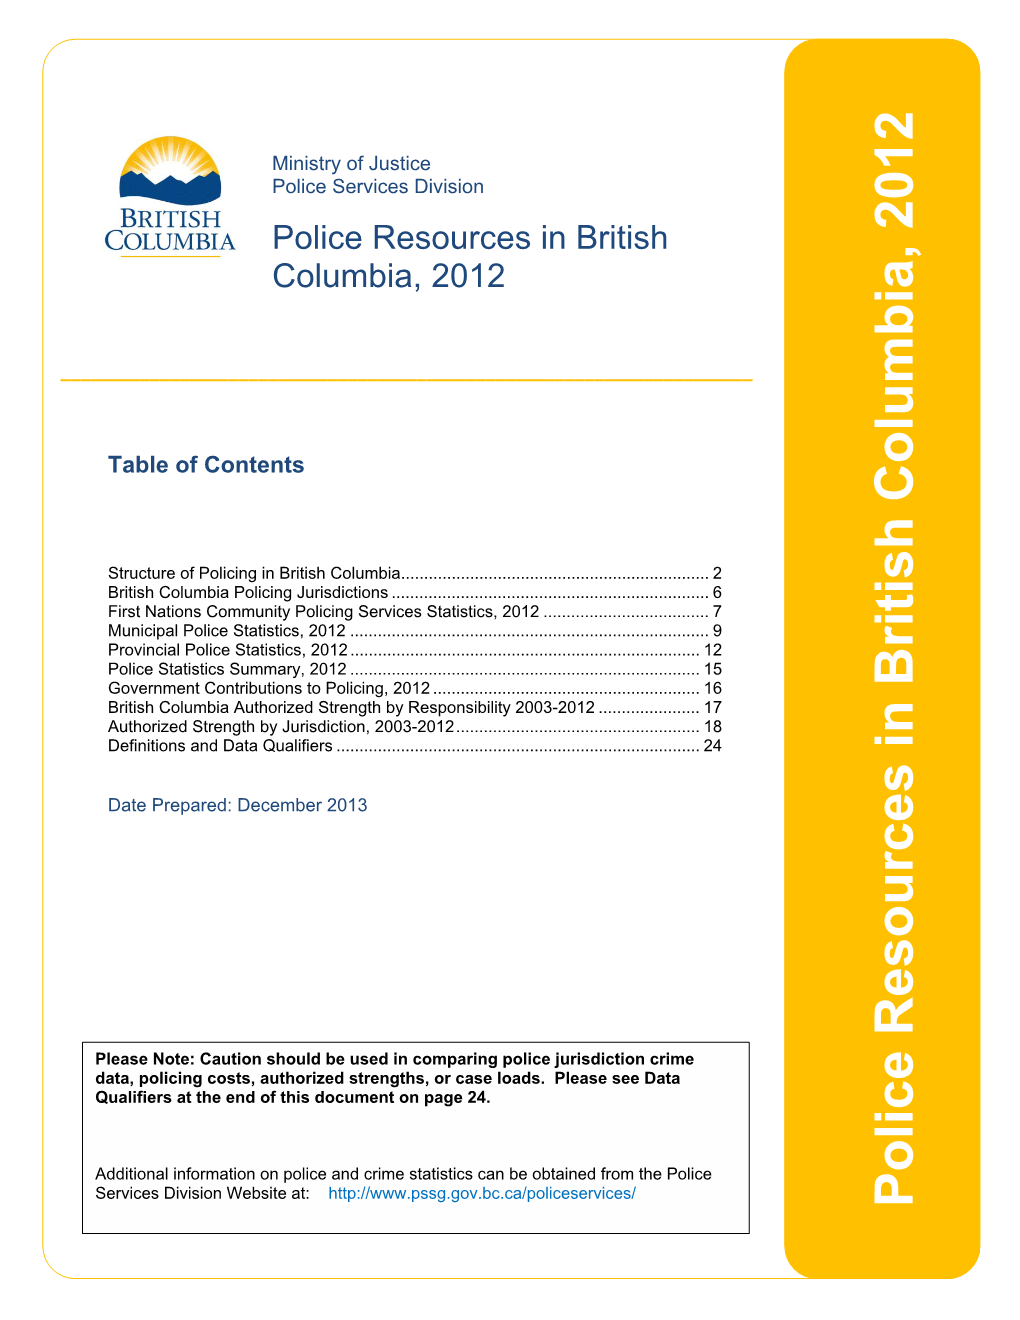 Police Resources in BC, 2013 Publication